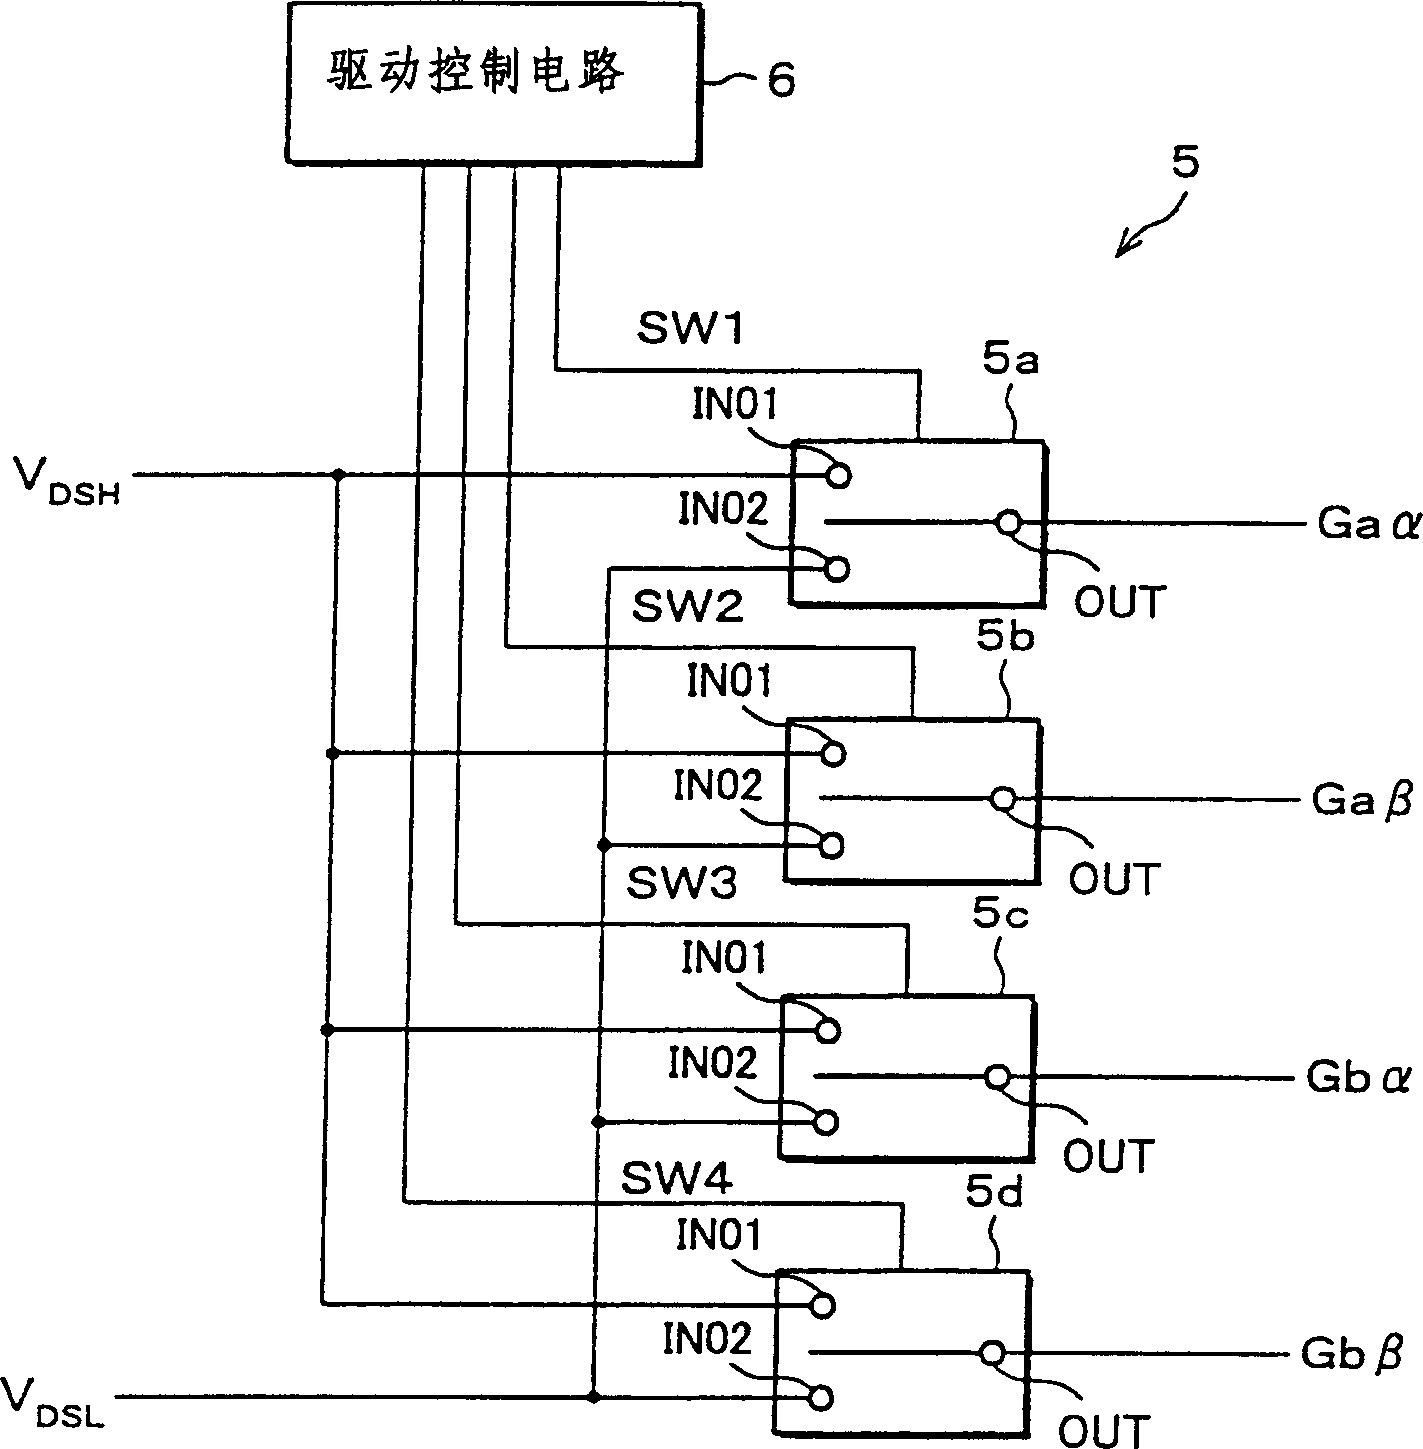 Active matrix display device and its data line switching circuit, switch portion drive circuit, and scan line drive circuit